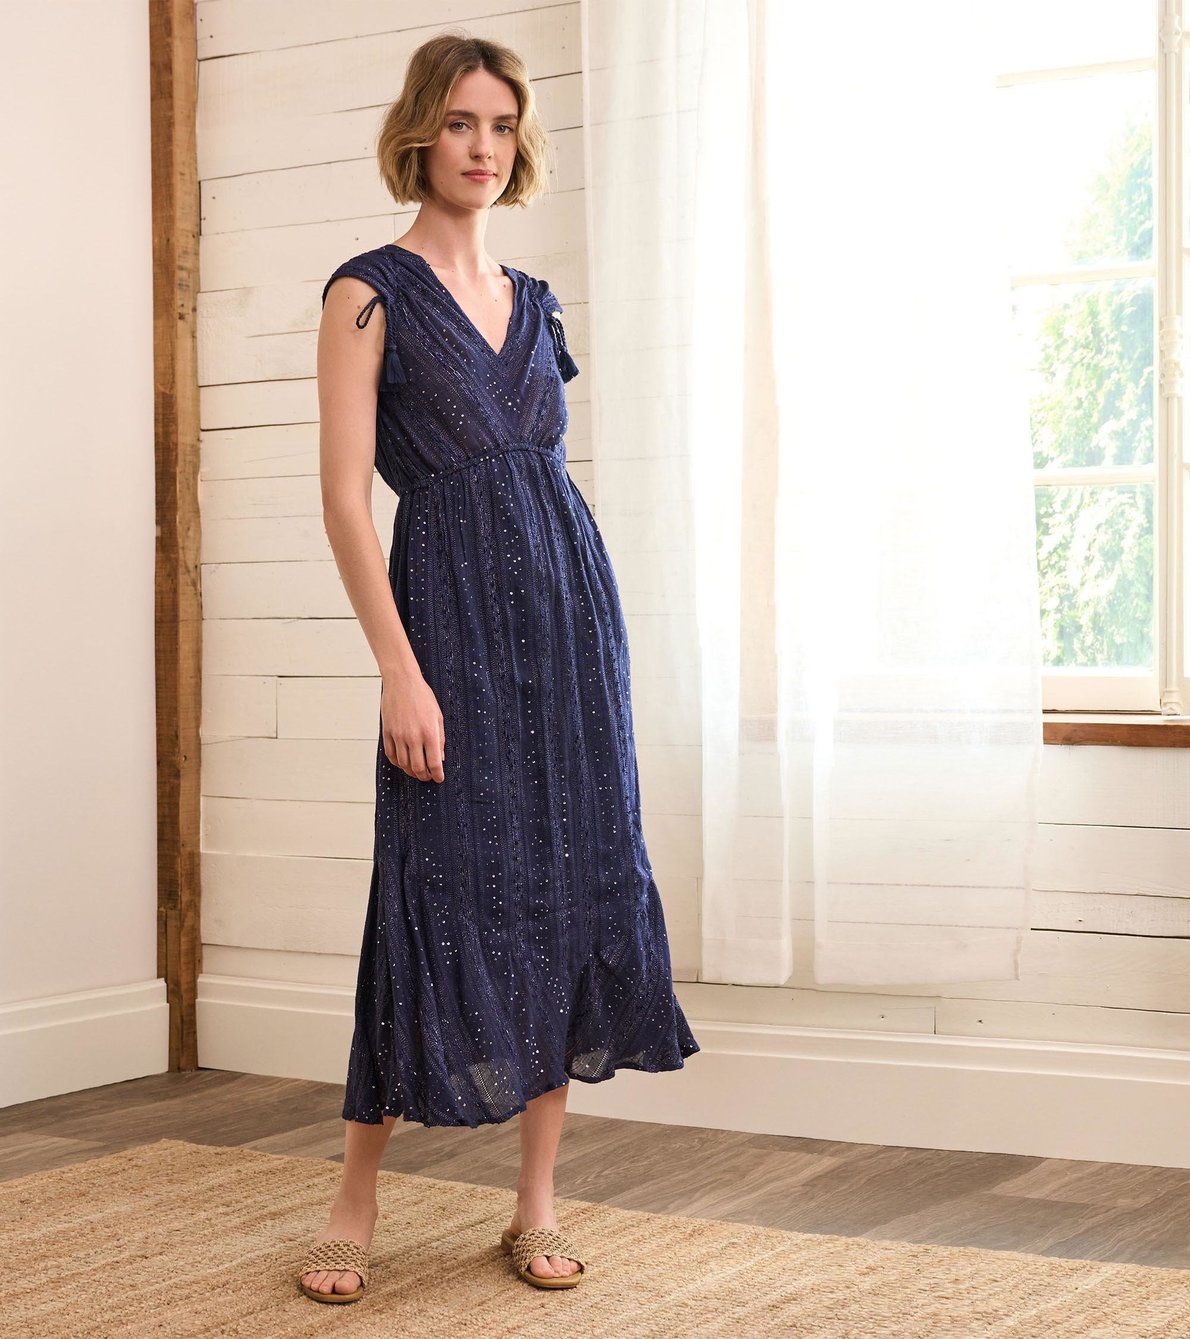 View larger image of Millie Dress - Navy Sequin Stripes